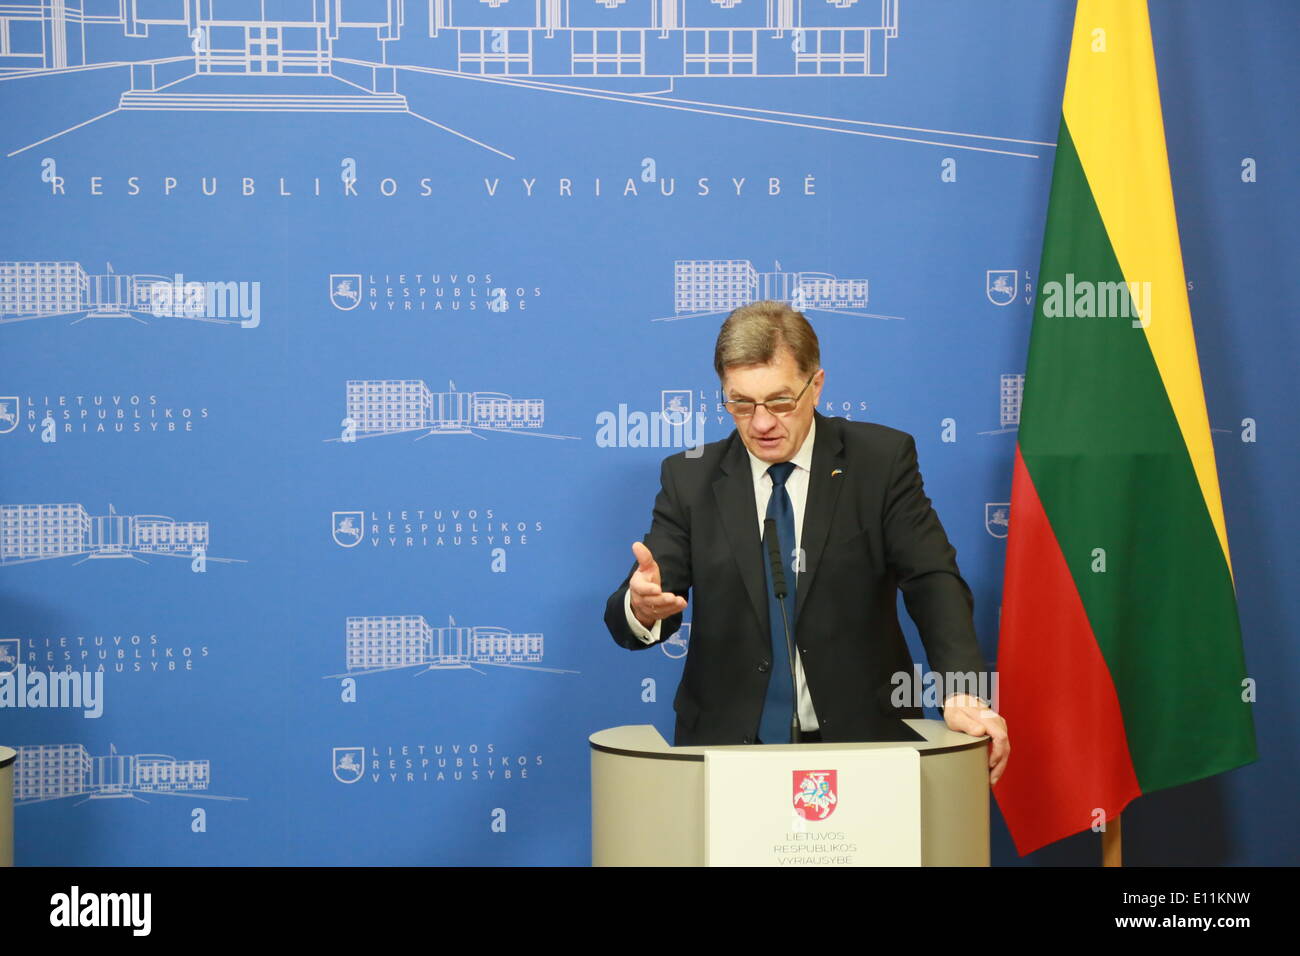 Vilnius, Lithuania. 21st May, 2014. Lithuanian Prime Minister Algirdas Butkevicius speaks during a press conference in Vilnius, Lithuania, May 21, 2014. Estonian Prime Minister Taavi Roivas met his Lithuanian counterpart and its president on Wednesday, discussing bilateral relations between the two countries, as well as energy and regional security issues. Credit:  Bu Peng/Xinhua/Alamy Live News Stock Photo